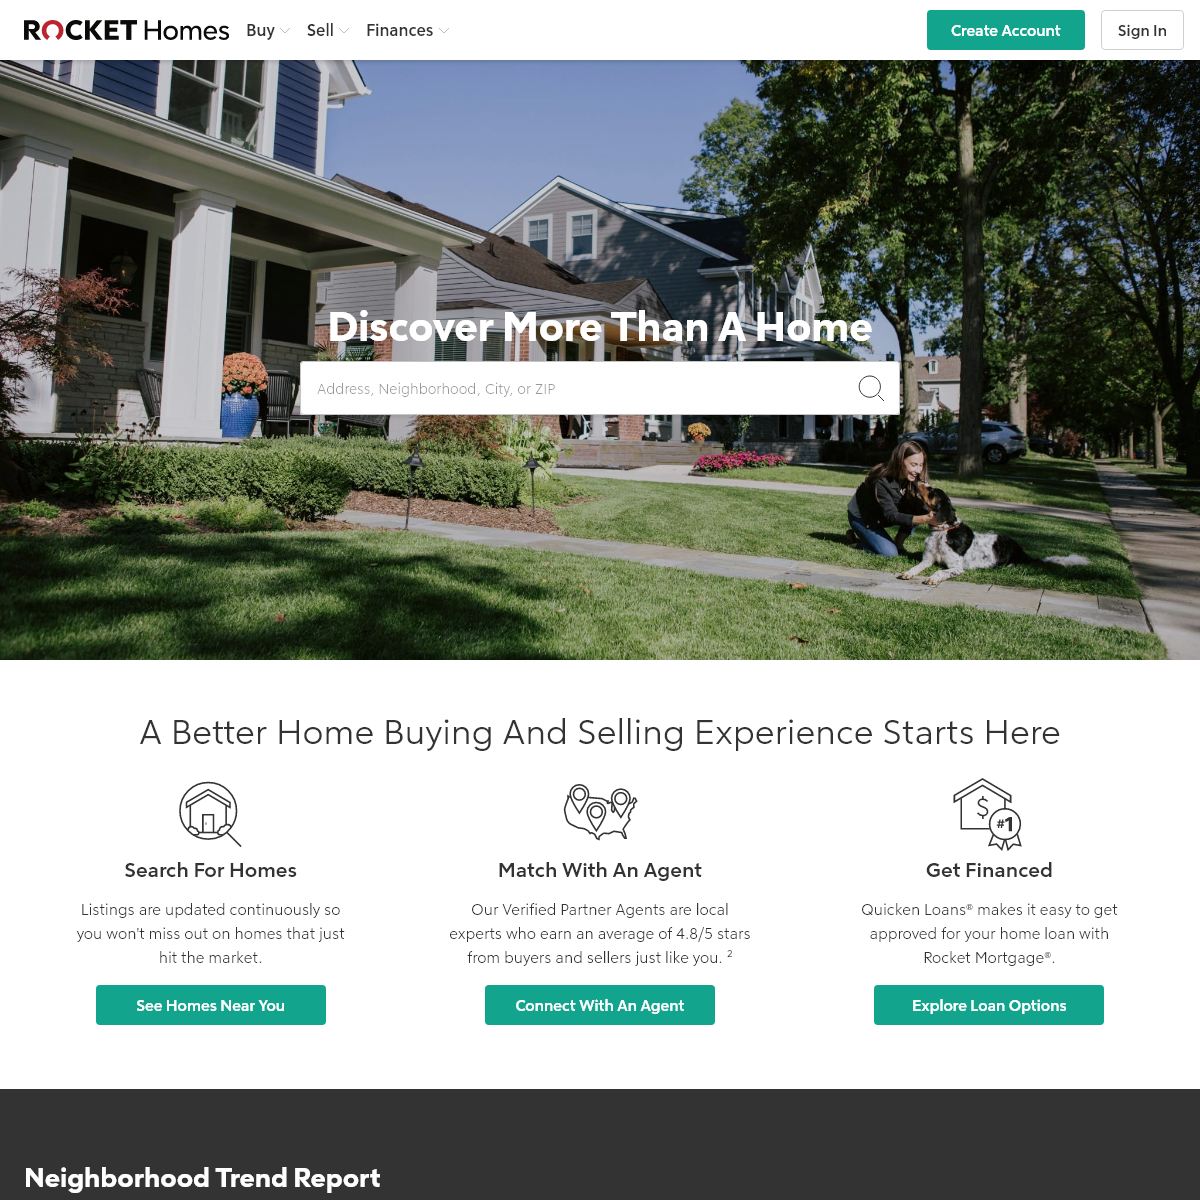 Find Your Dream Home - Get a Real Estate Agent - Rocket Homes